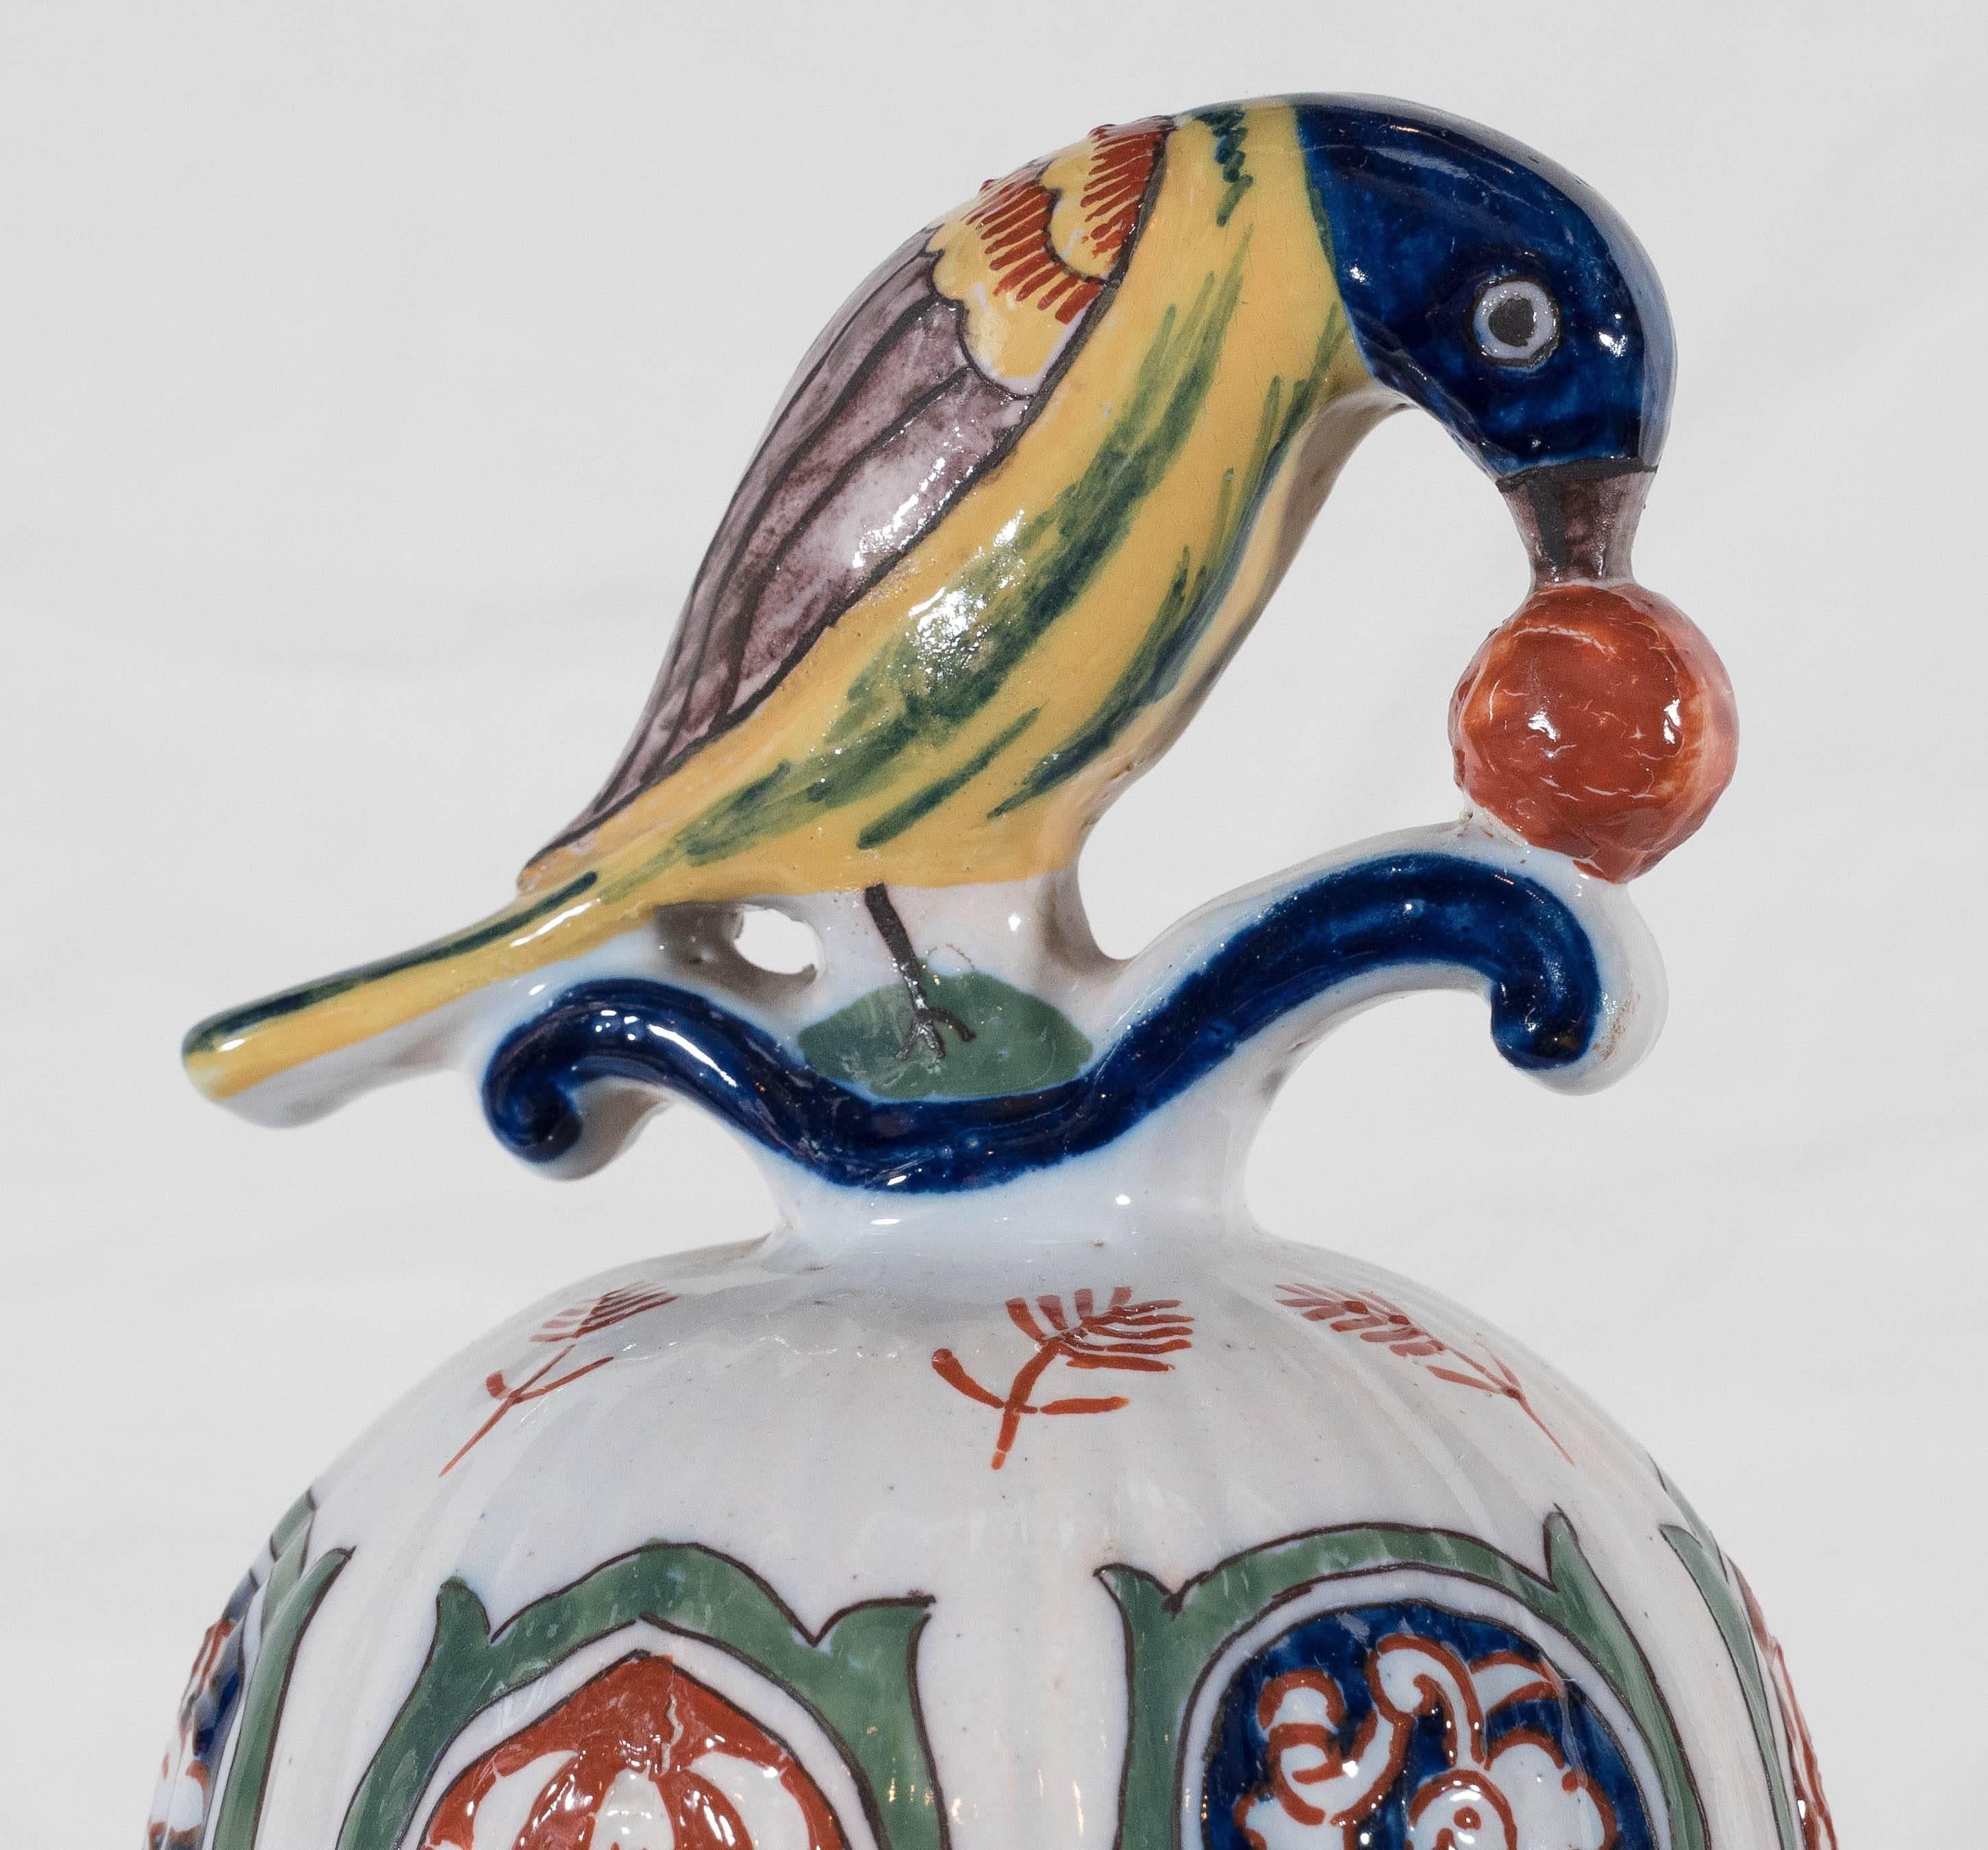 A pair of colorful Dutch delft polychrome vases painted in the traditional Kashmir palette of cobalt blue, green and orange with touches of bright yellow. The vases are ribbed and decorated with scenes of long-tailed birds in a flower-filled garden.